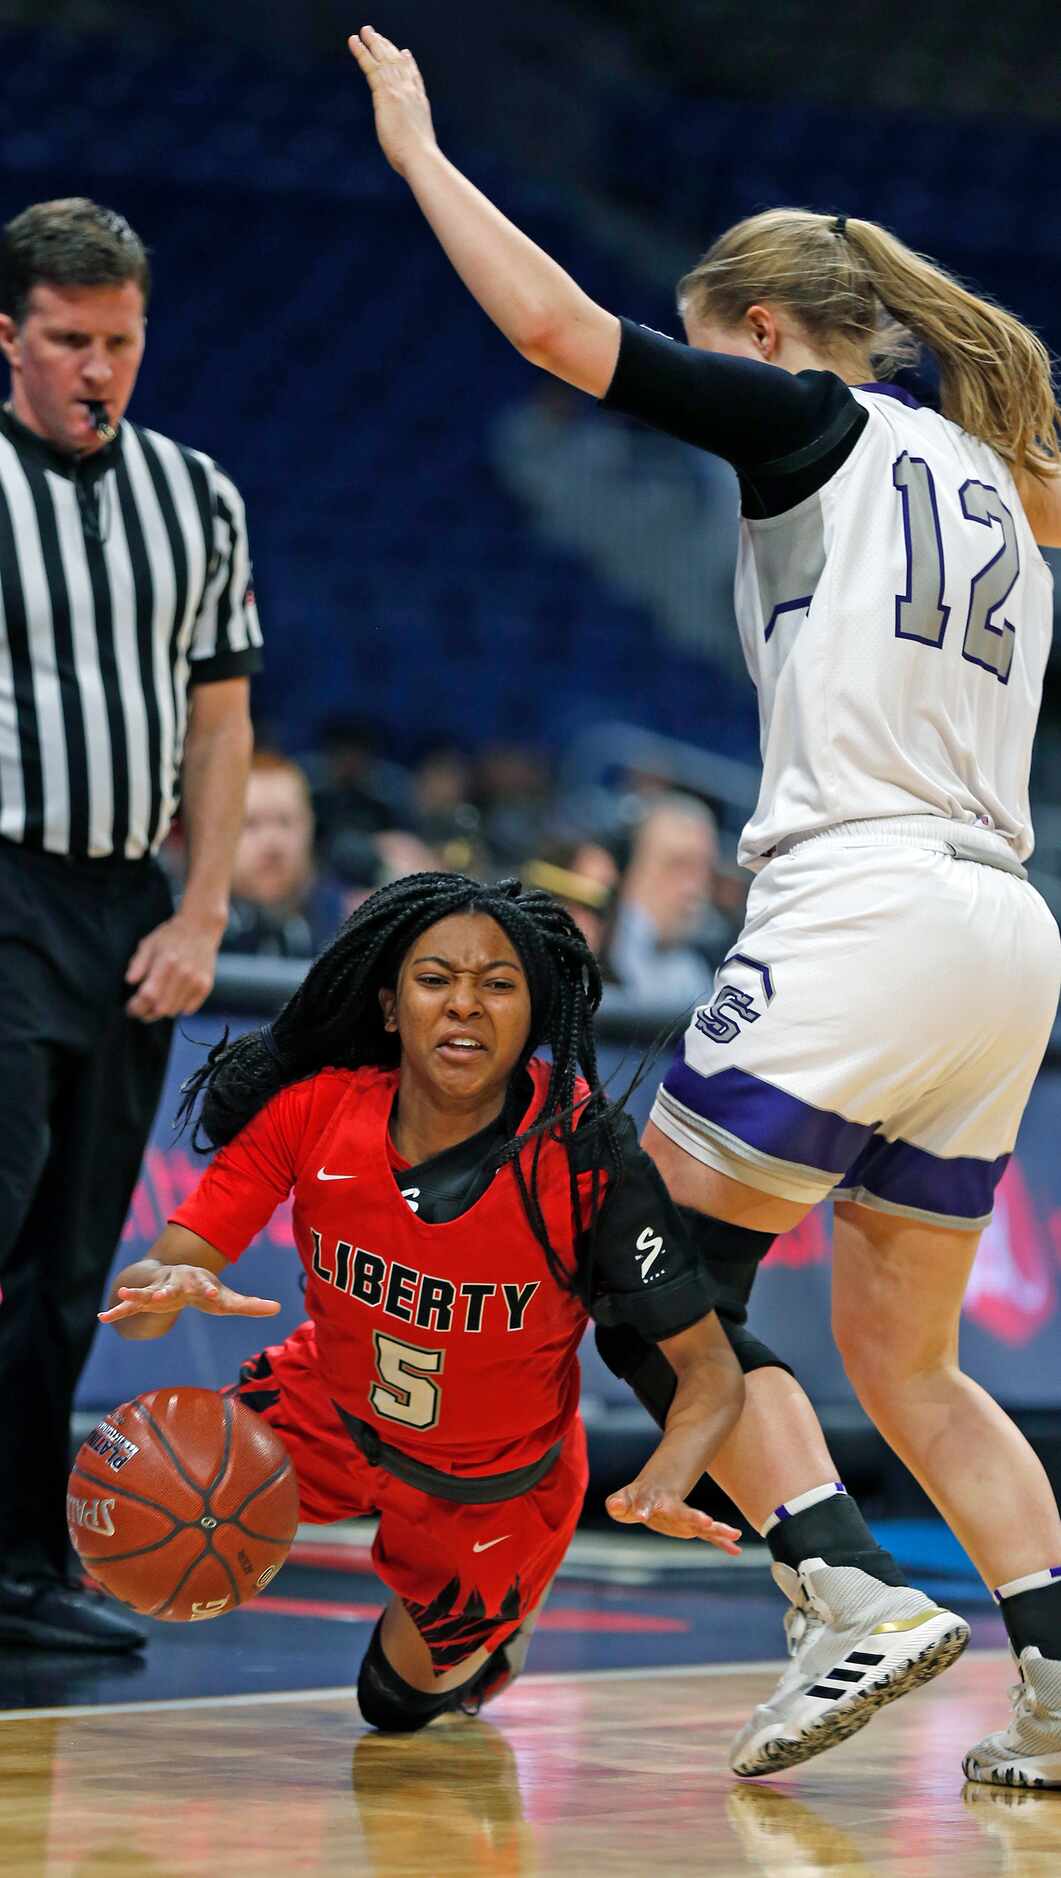 Frisco Liberty guard Zoe Junior #5 is fouled by College Station guard Rebekah Hailey #12 in...